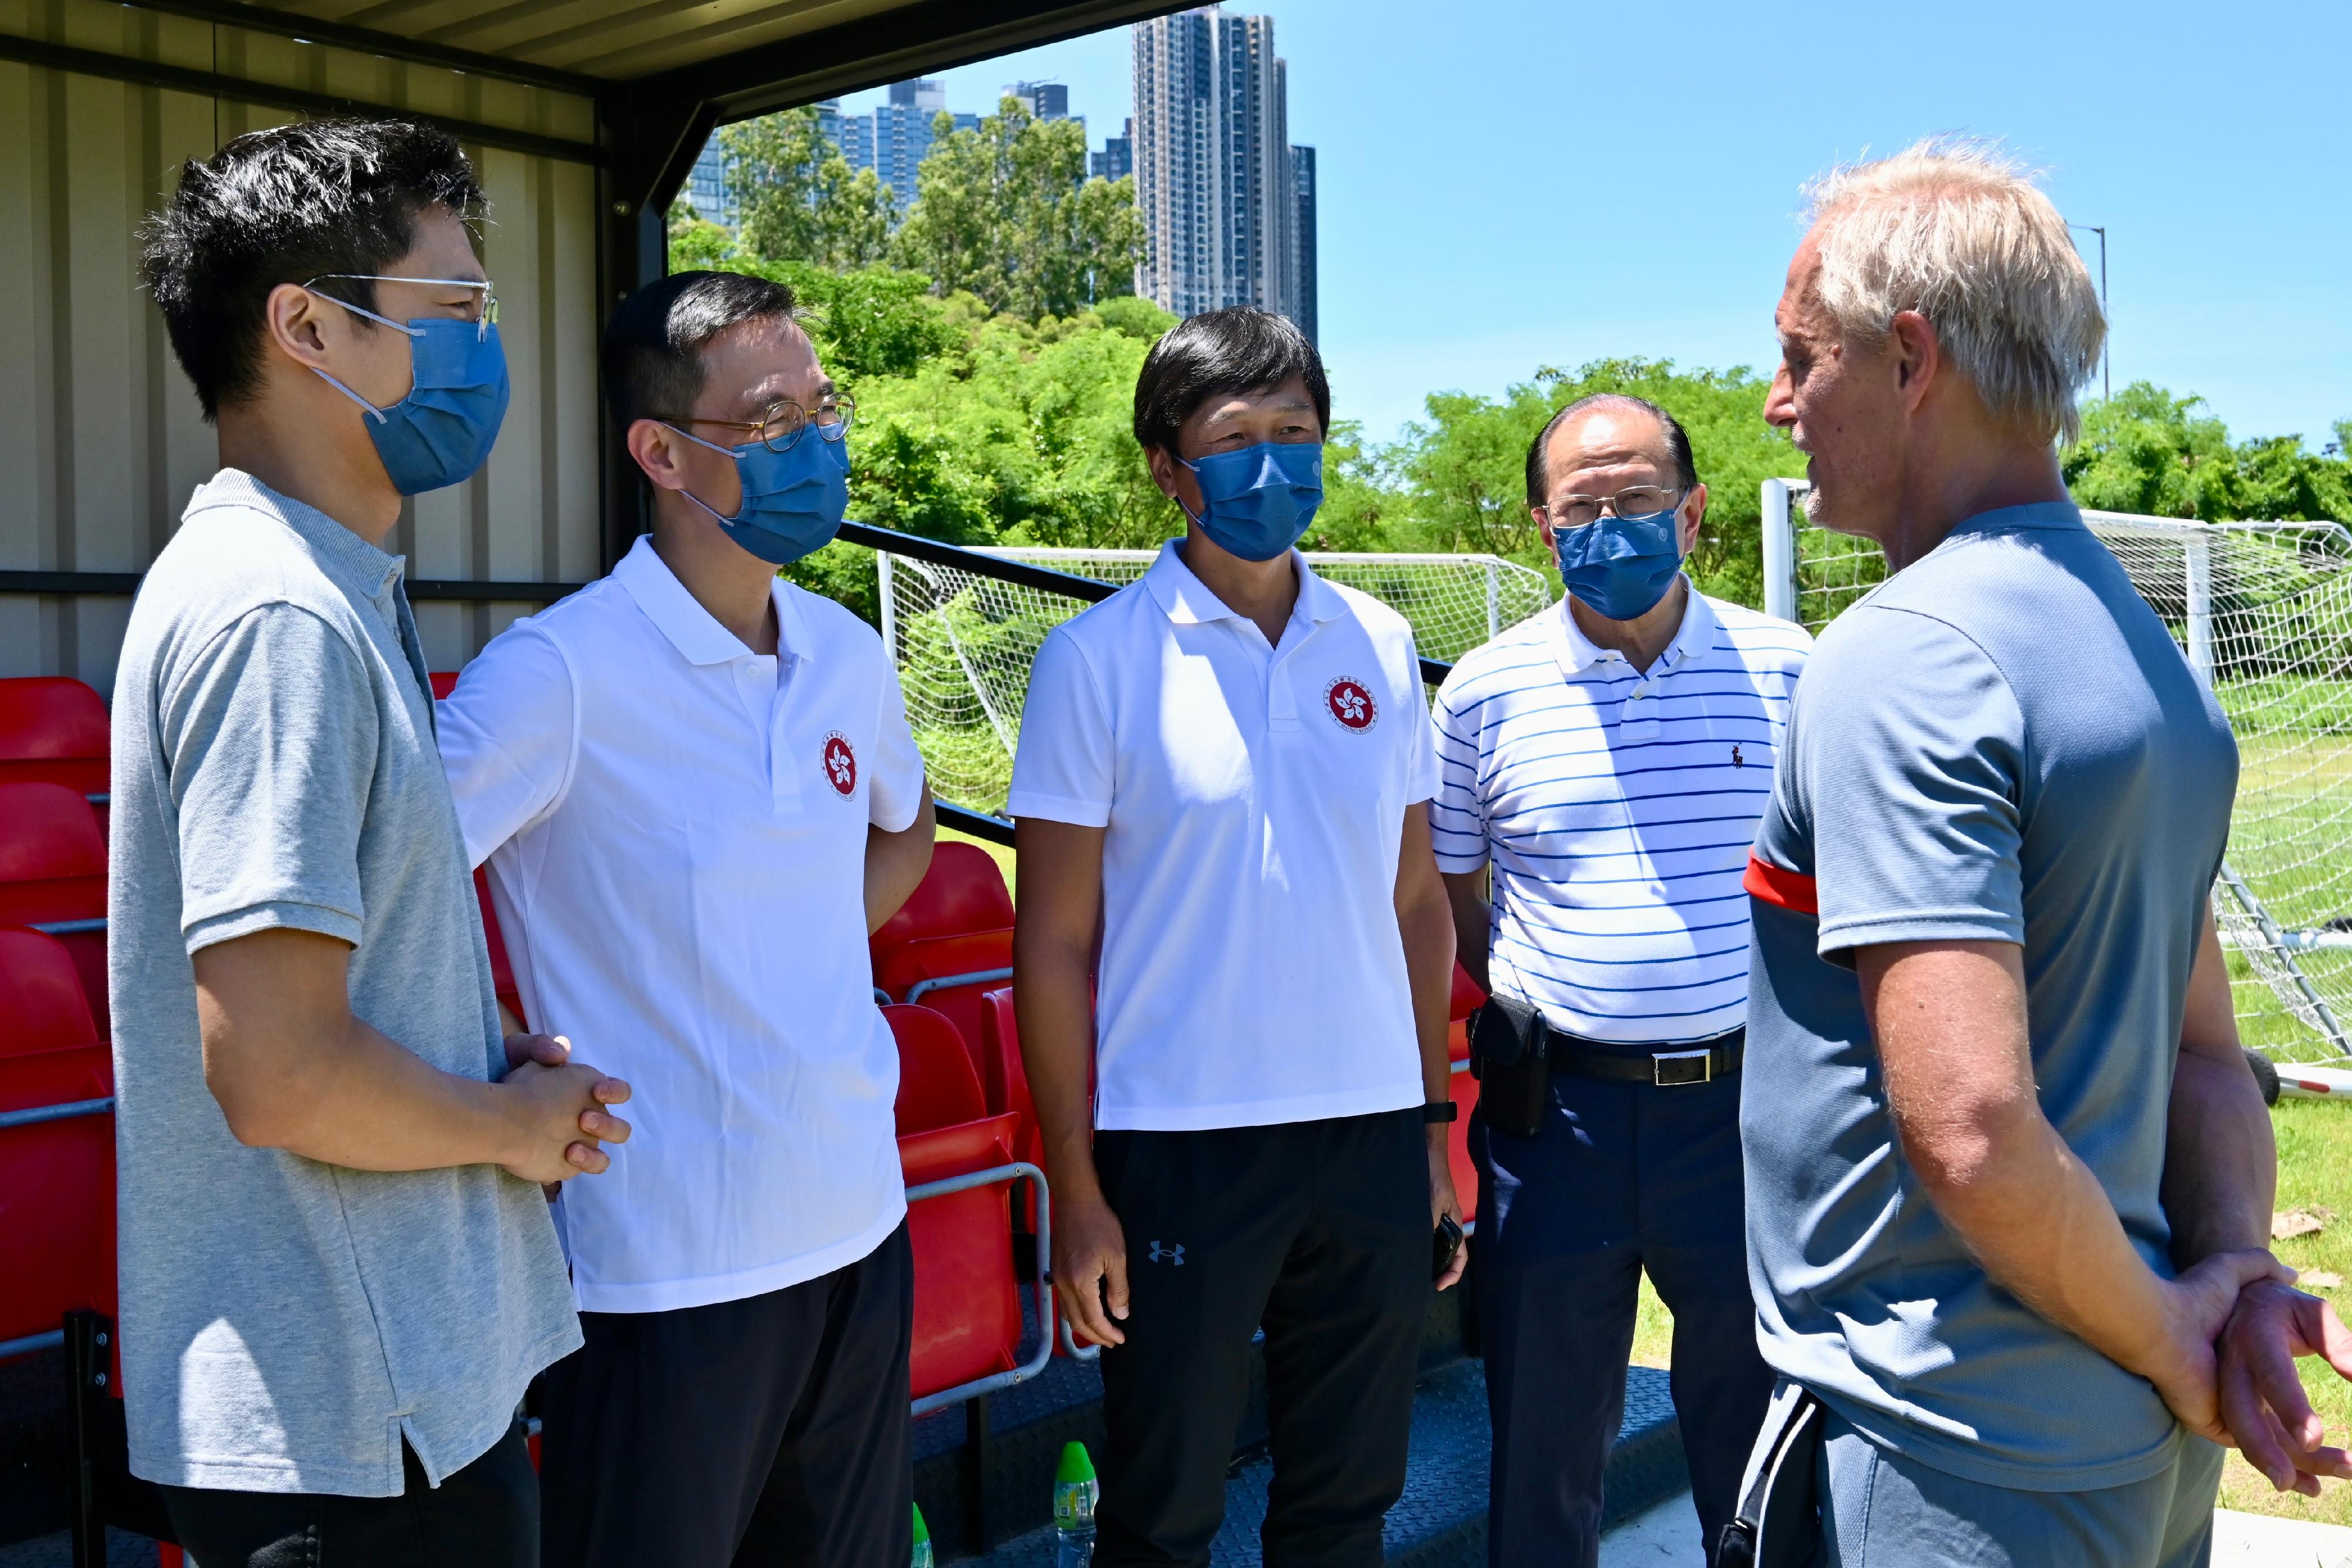 The Secretary for Culture, Sports and Tourism, Mr Kevin Yeung, visited the Jockey Club Hong Kong Football Association Football Training Centre today (July 13). Photo shows Mr Yeung (second left) chatting with the Head Coach, Mr Jörn Andersen (first right), to learn about the training of the Hong Kong football team.